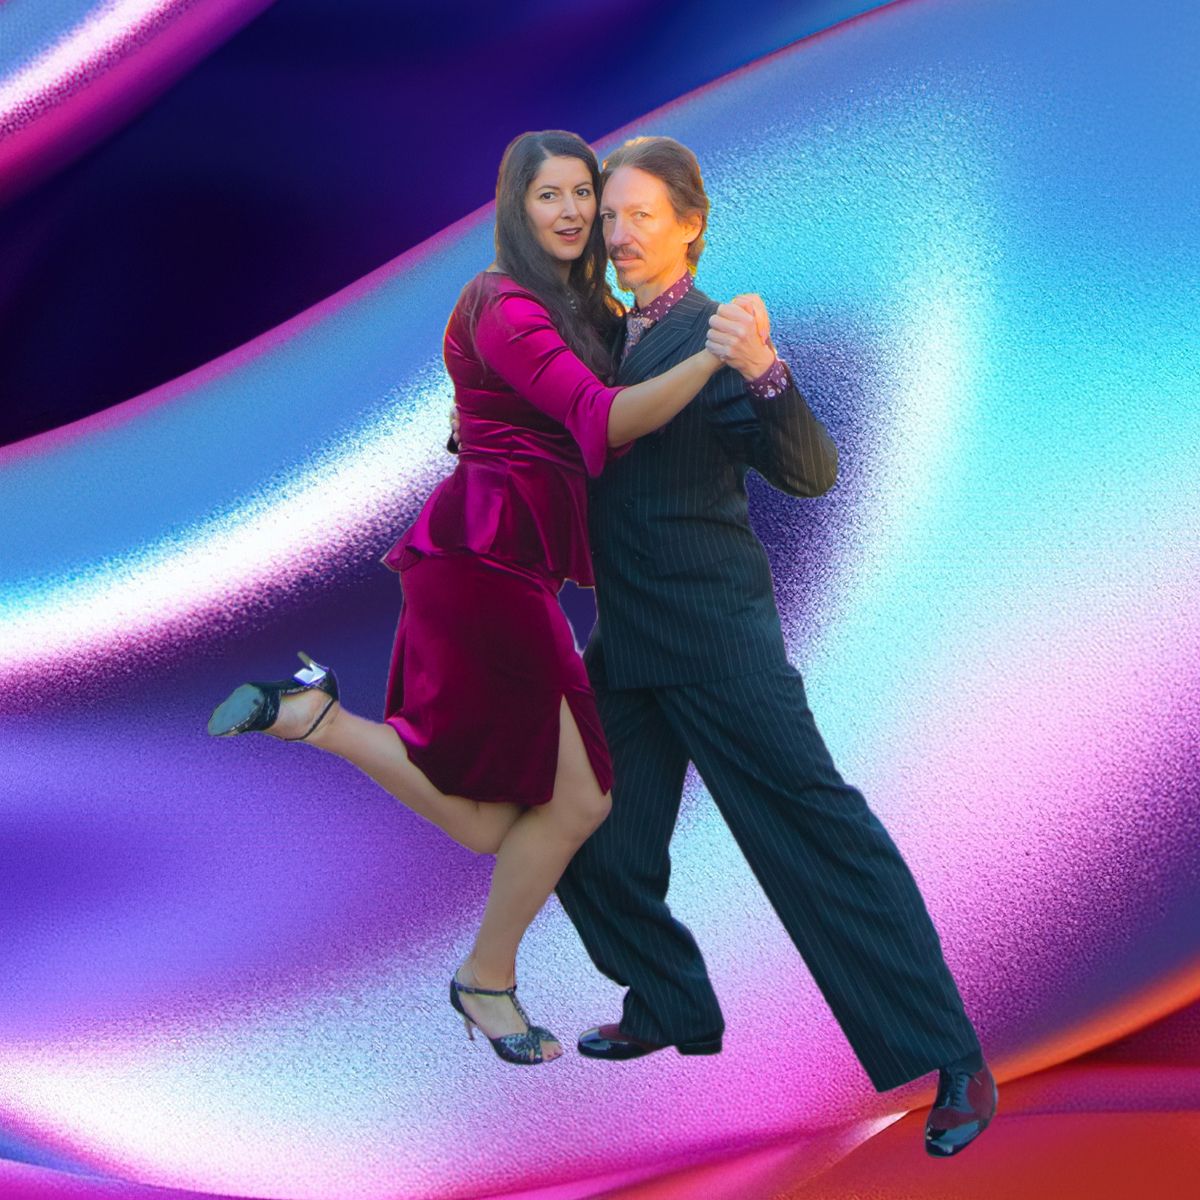 Marcelo Solis dancing Argentine Tango with Mimi on a colorful chrome background